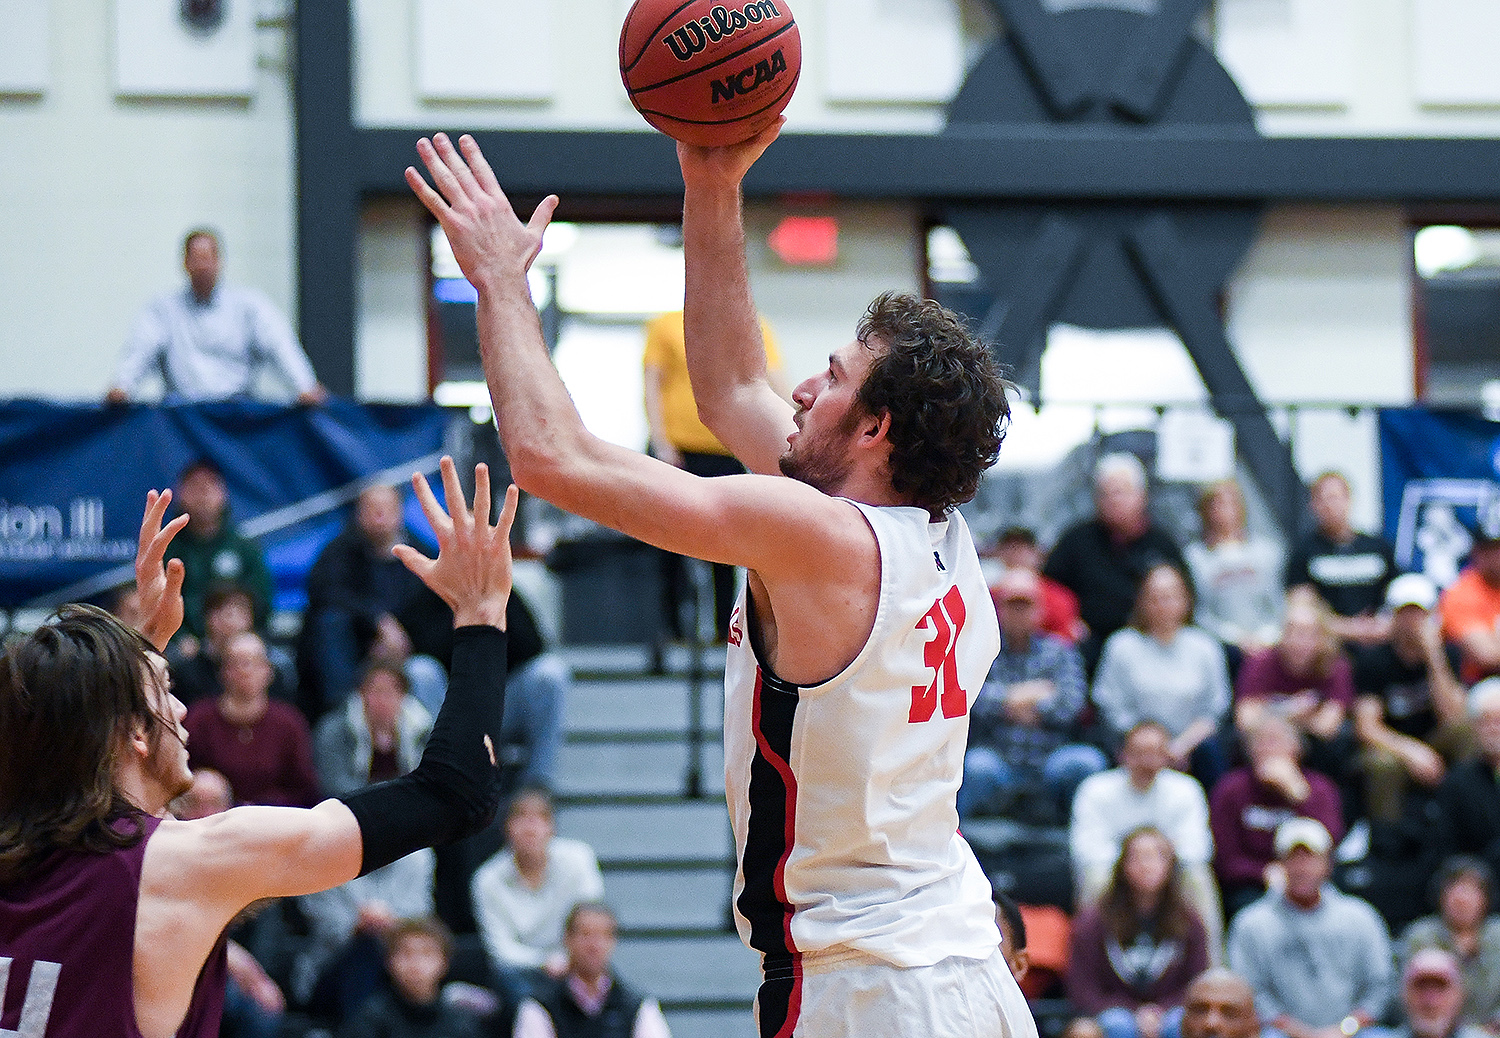 Nathan Krill ’18 and the Wesleyan men’s basketball team hosted first and second rounds of the NCAA Tournament on March 2-3 for the first time in program history. (Photo by Jonas Powell ’18)